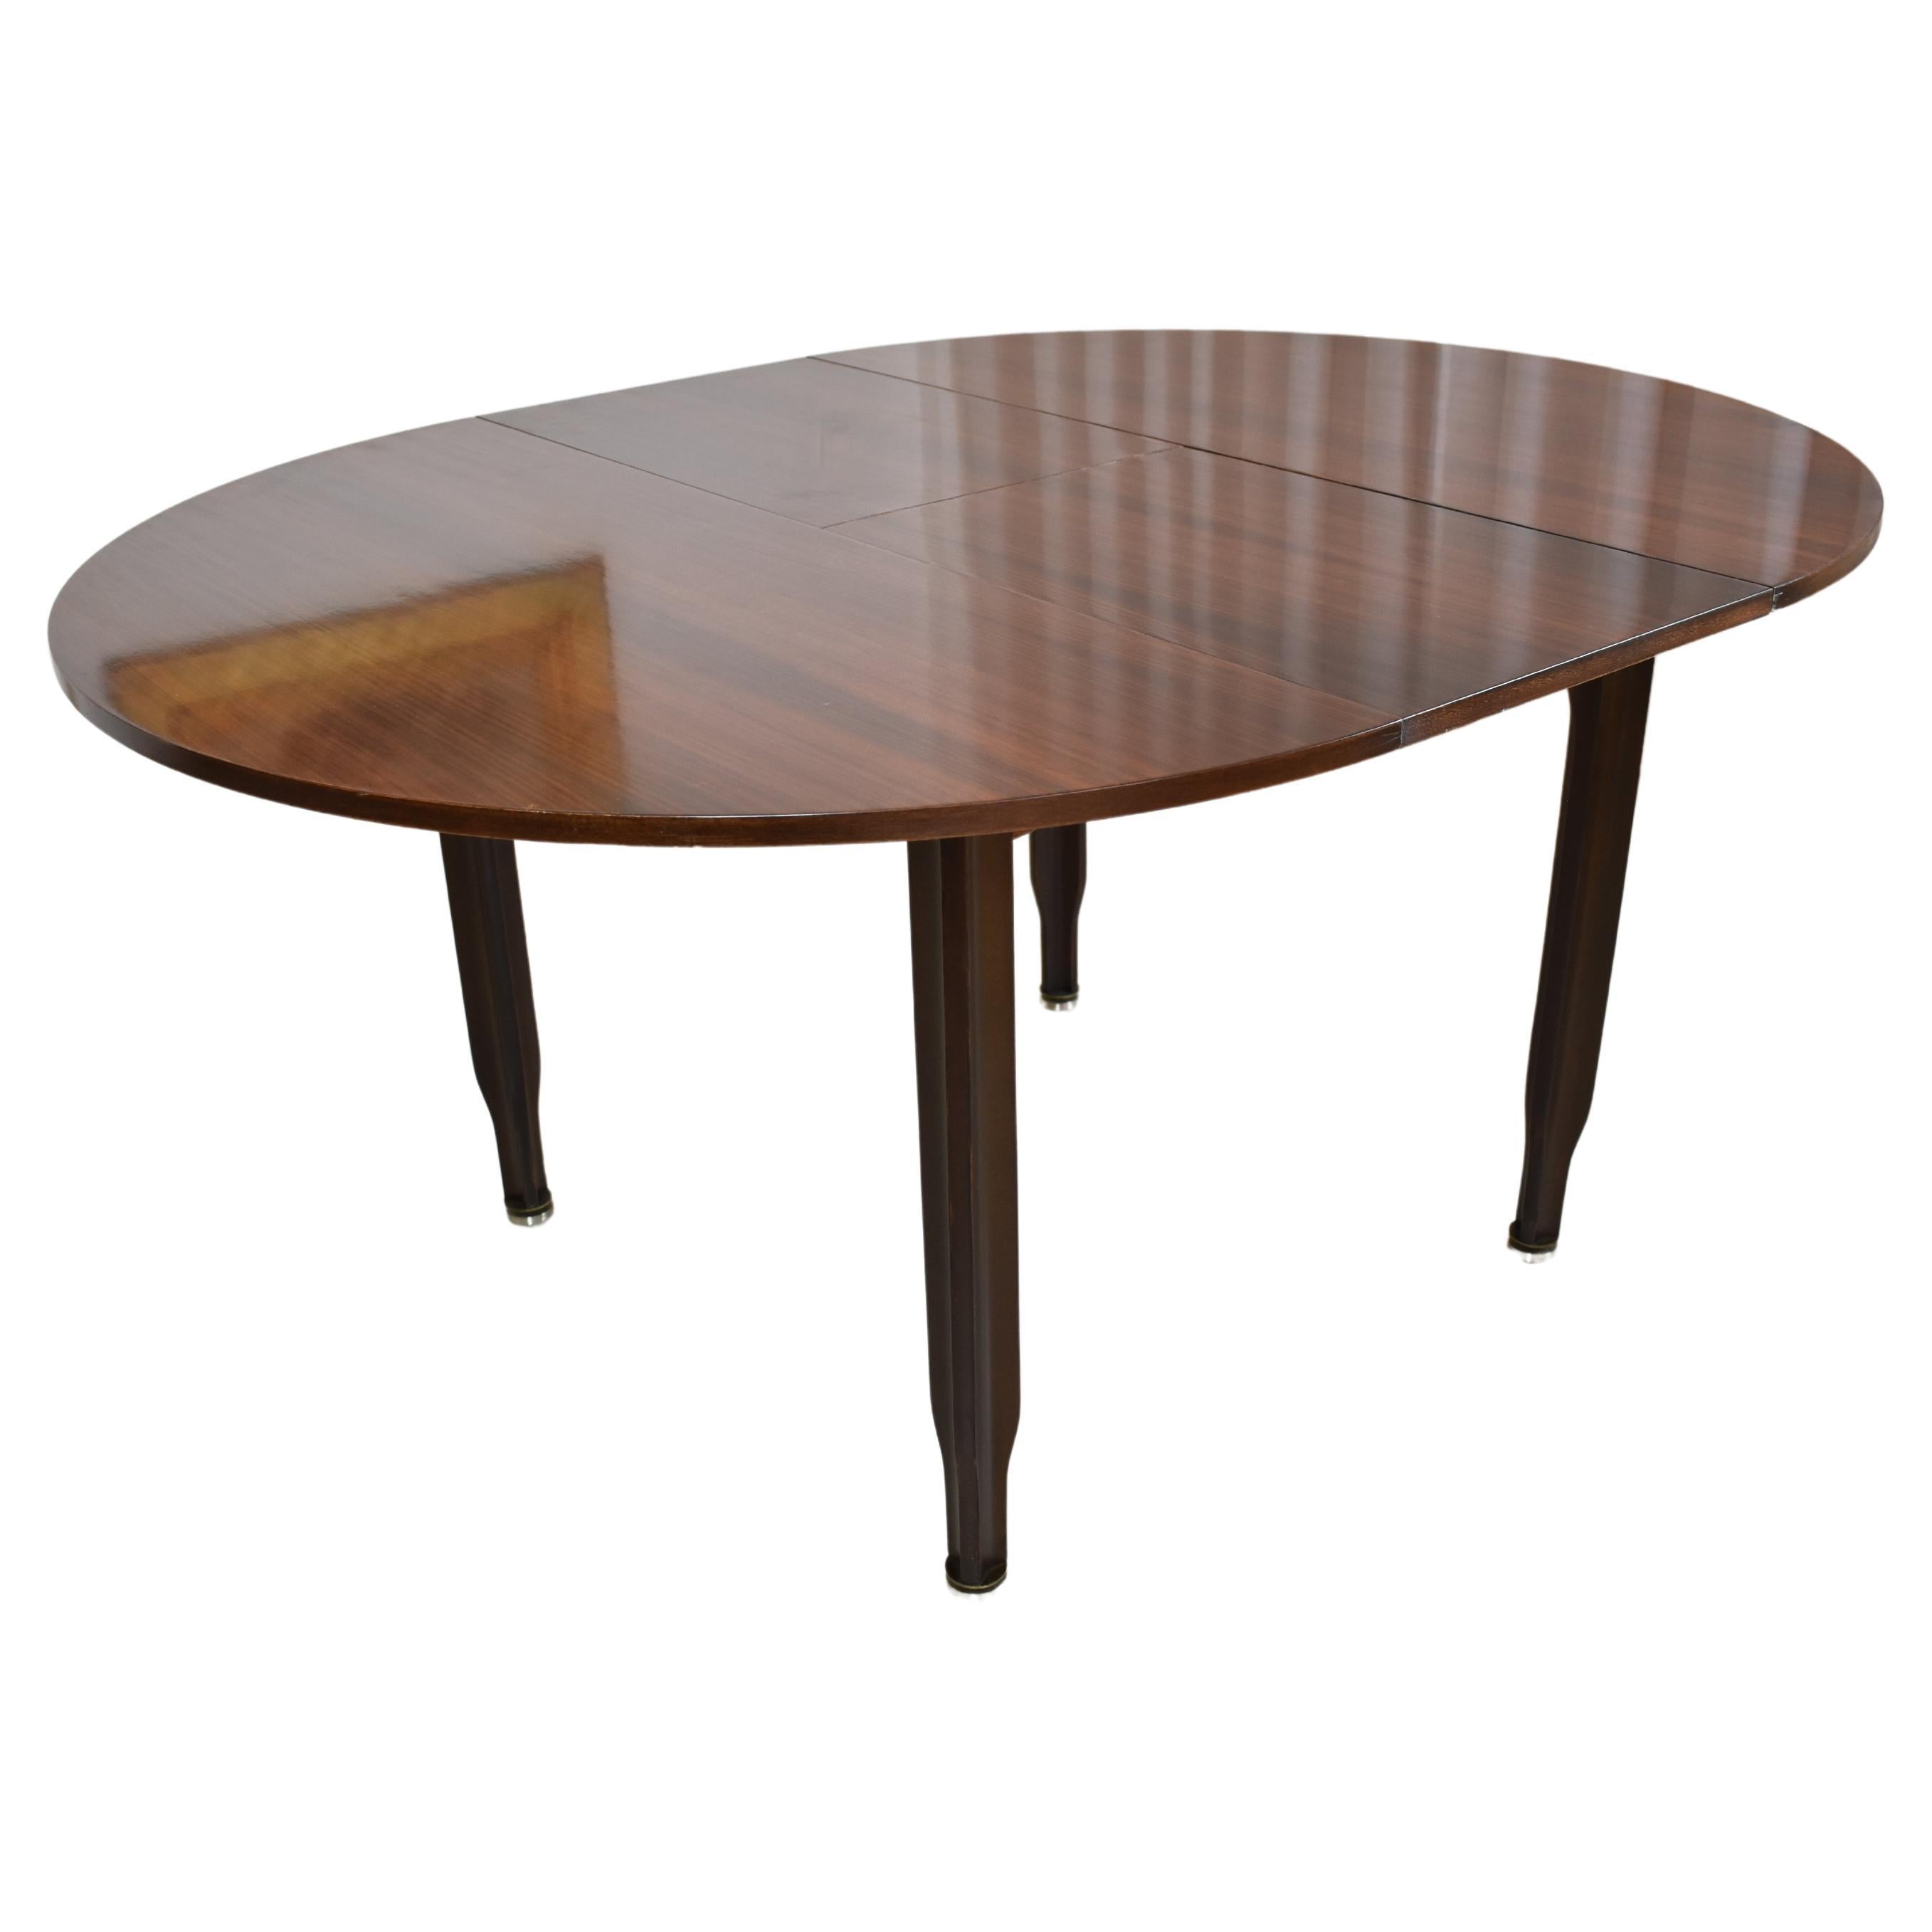  1960's Italian Extendable Dining Table by Gigi Radice  For Sale